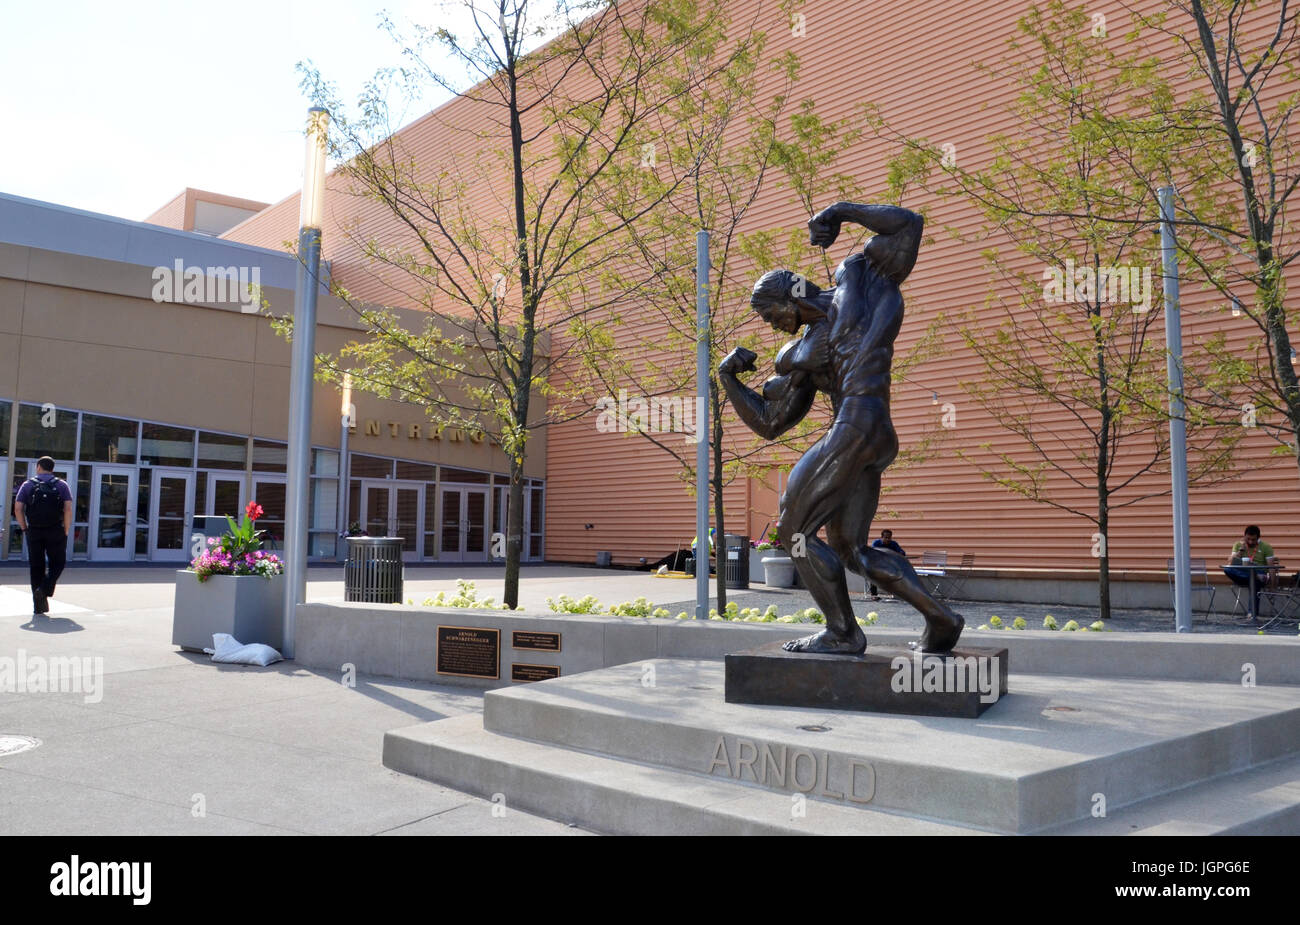 COLUMBUS, OH - JUNE 27: A sculpture of Arnold Schwarzenegger at the Columbus Convention Center is shown on August 7, 2017. Columbus hosts the annual A Stock Photo